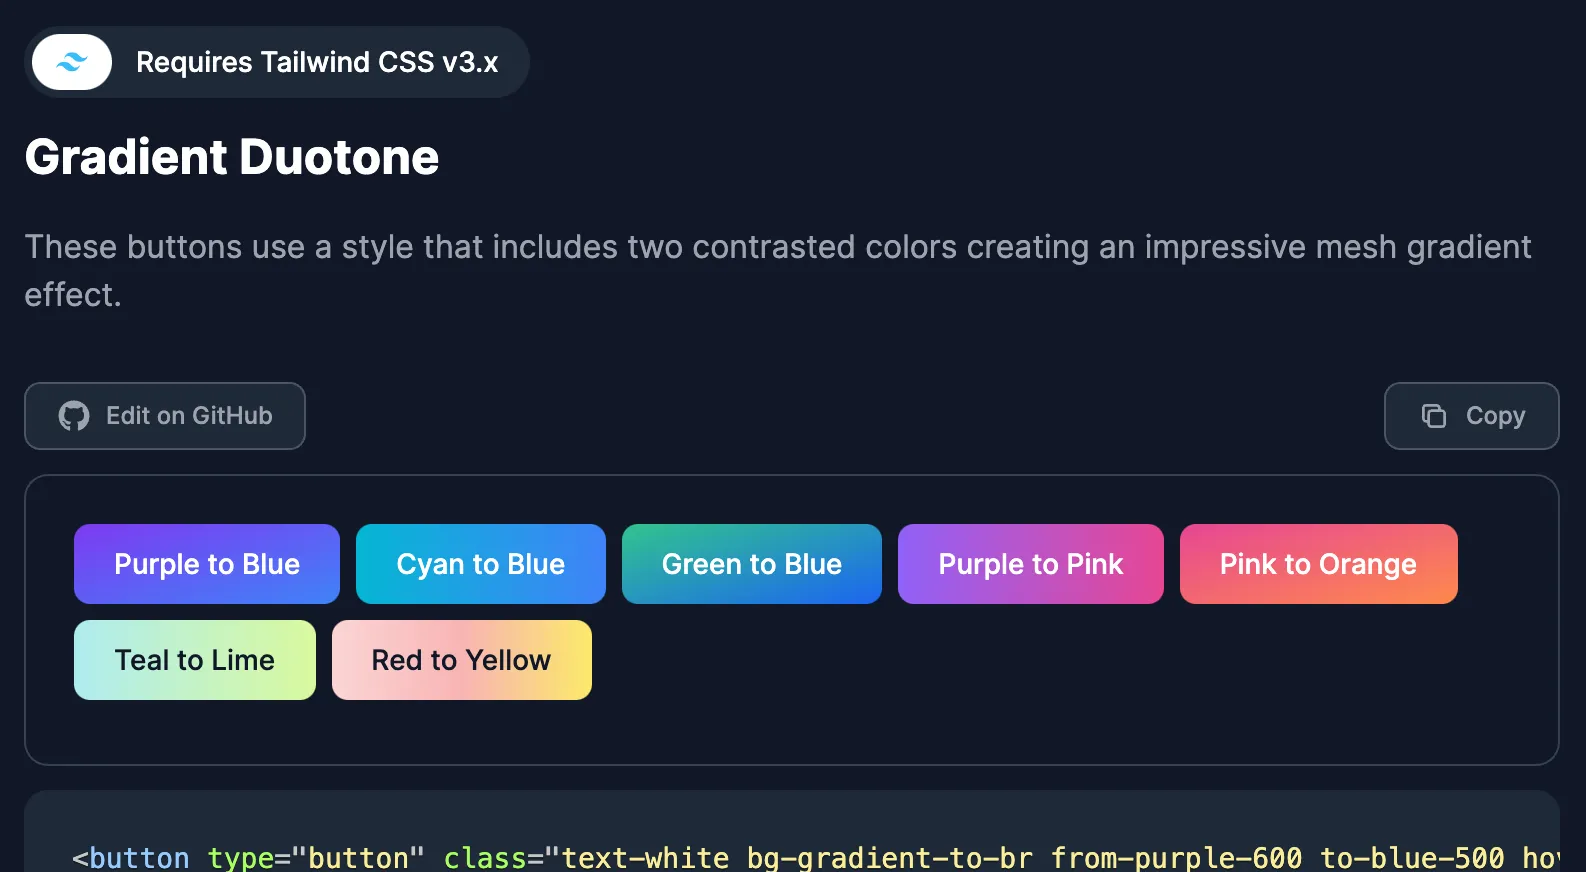 Check out these gradient buttons built with Tailwind CSS